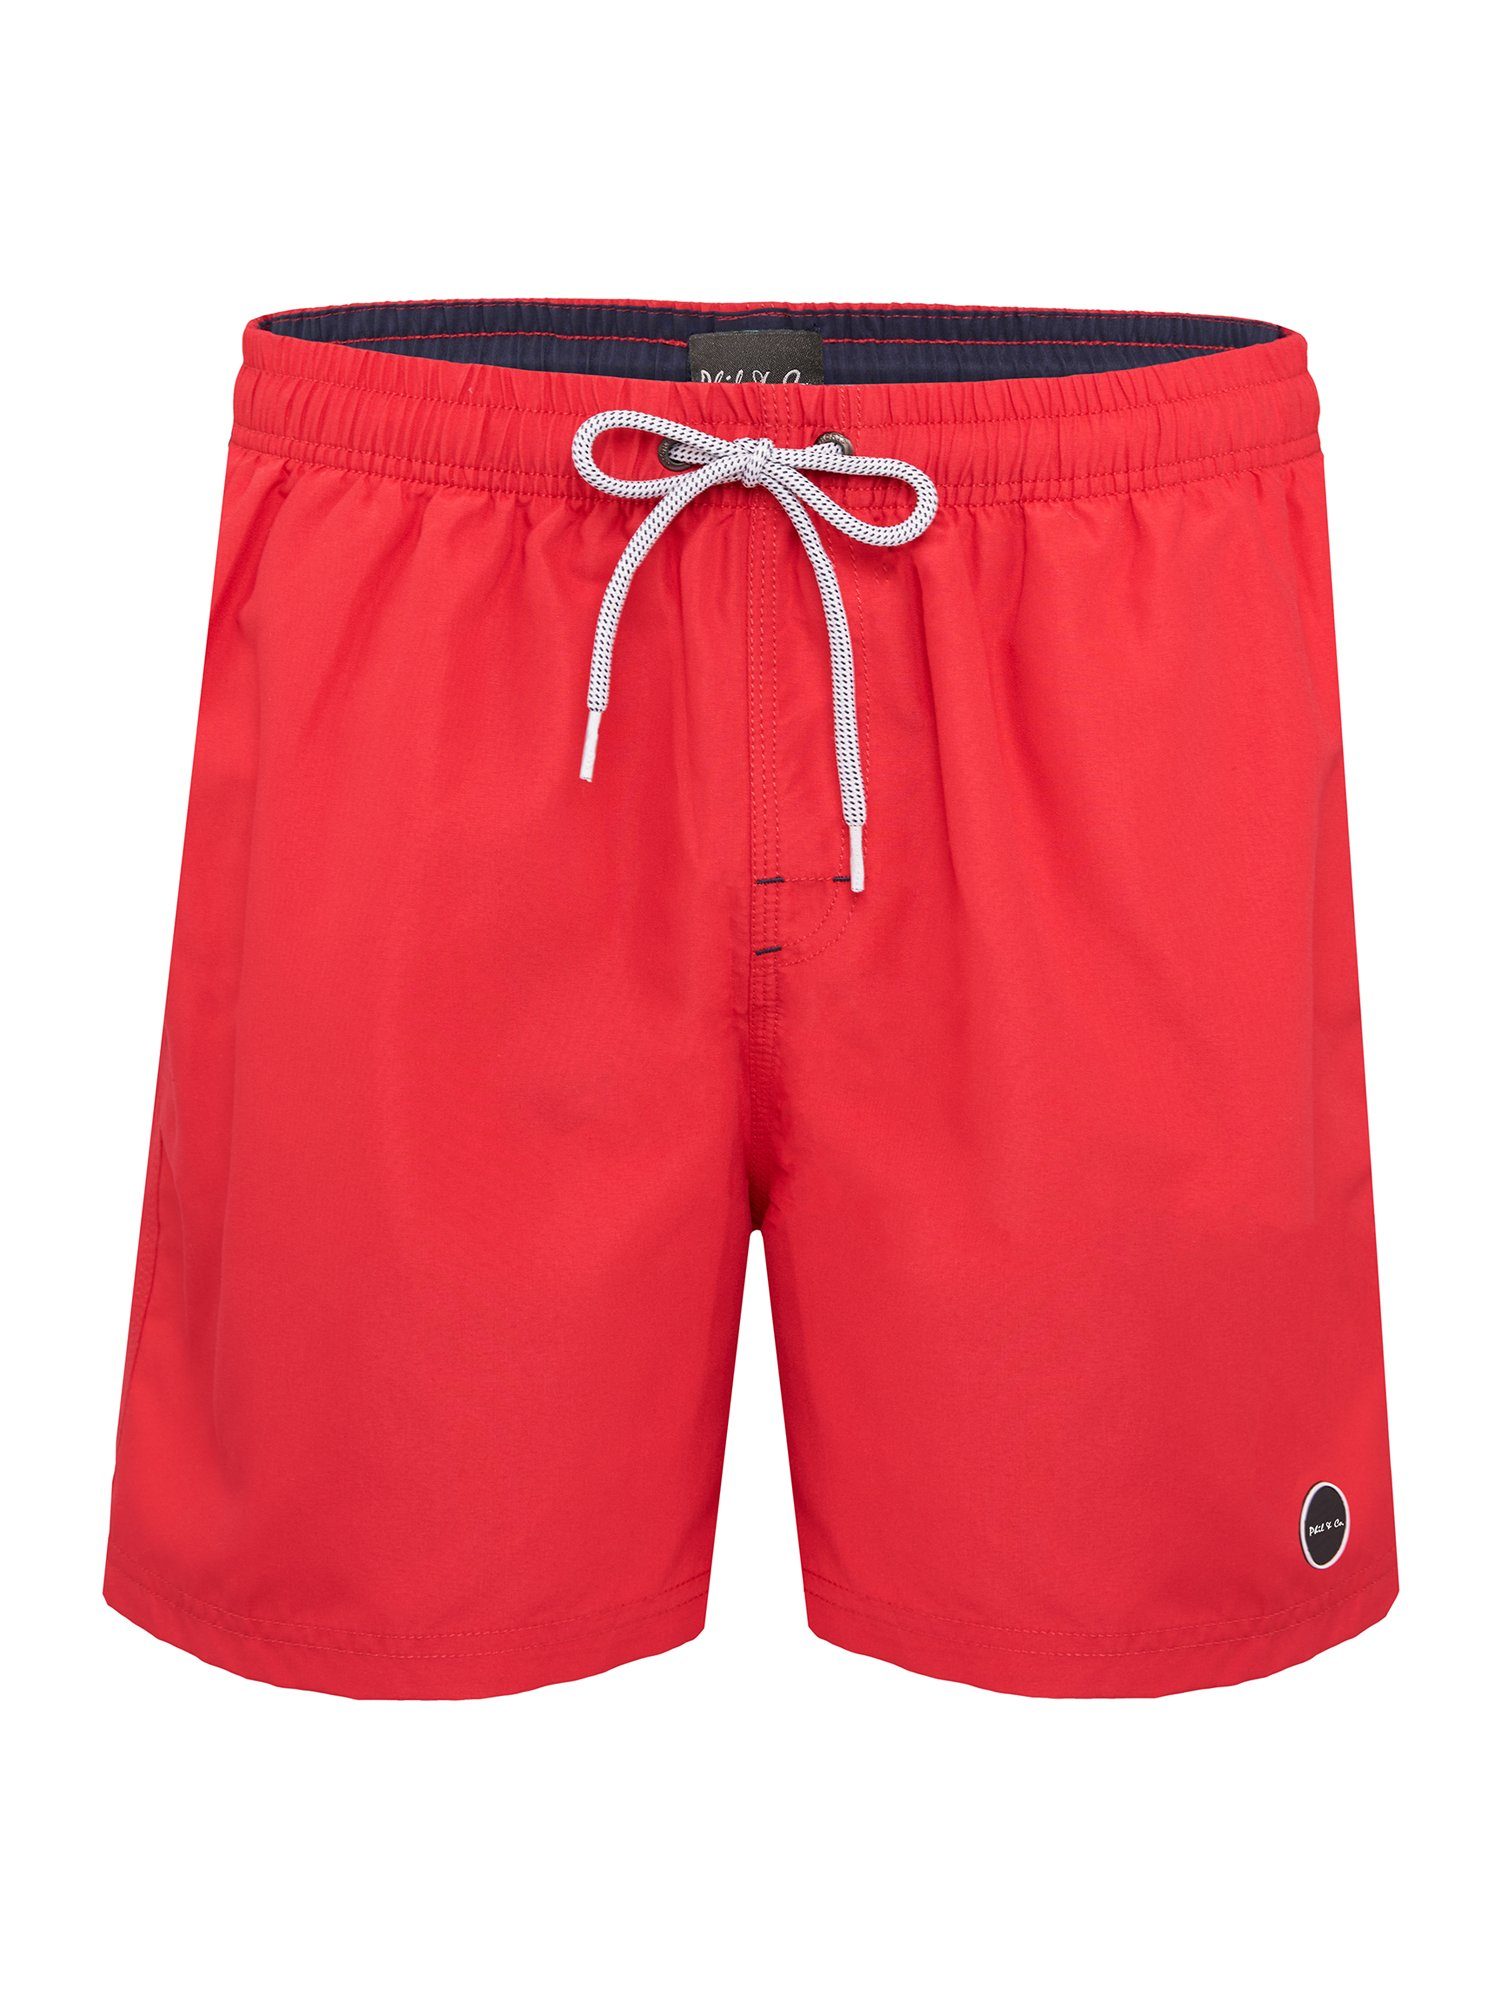 Tagesgericht Phil & red Co. Badeshorts solid Classic (1-St)